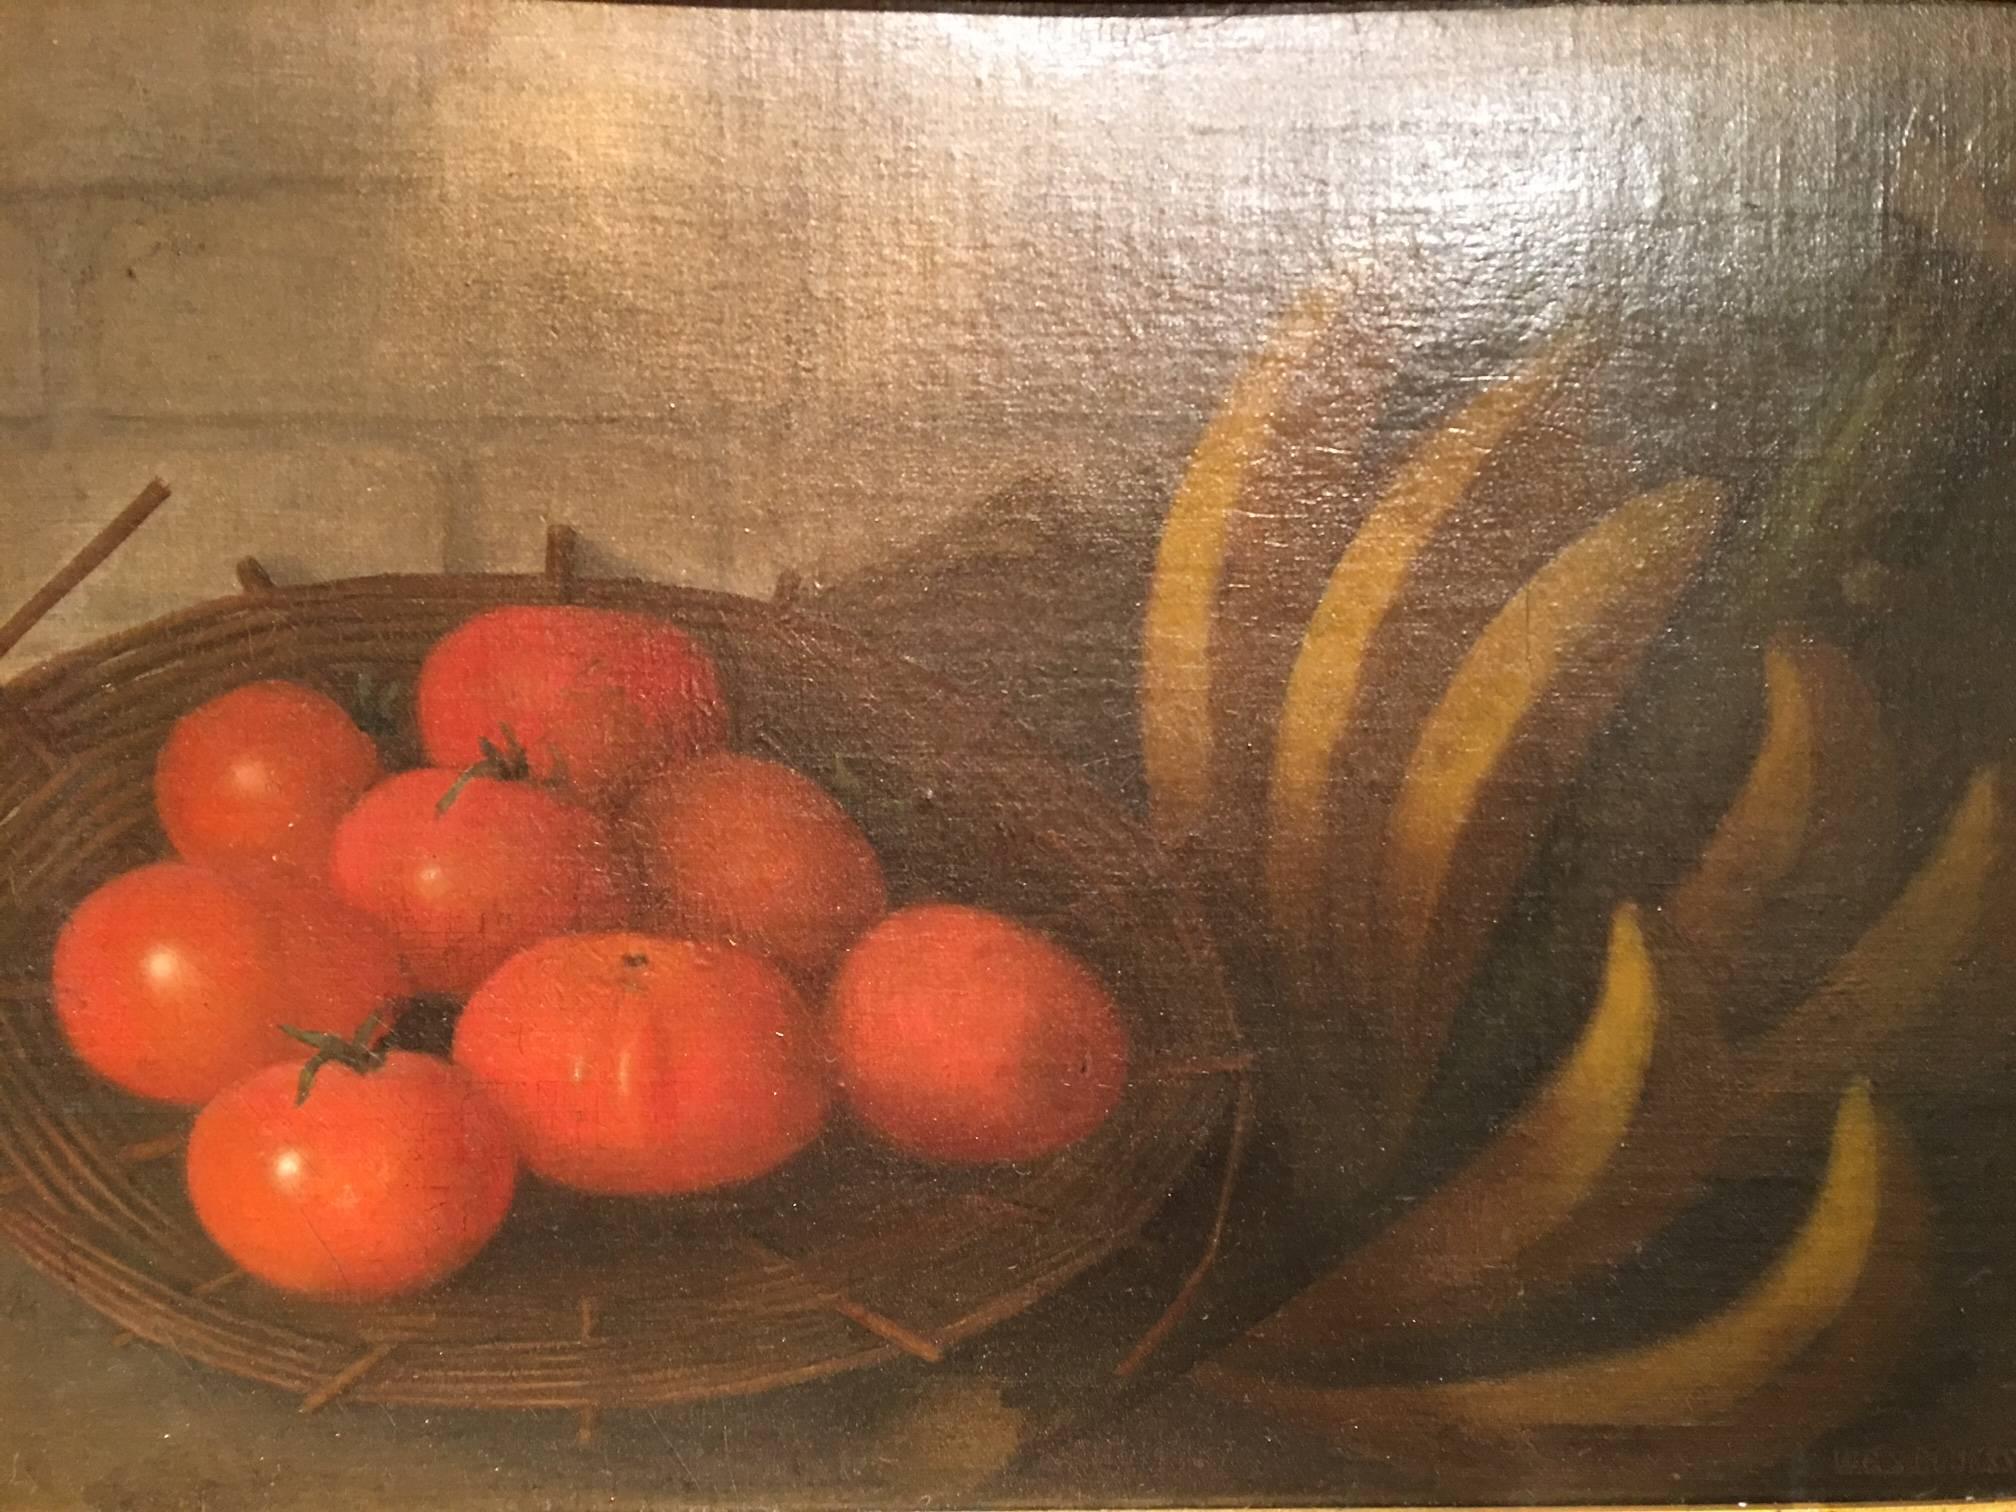 Framed Oil on Canvas, Still Life with Tomatoes, Signed W.G.S. Boursse 2